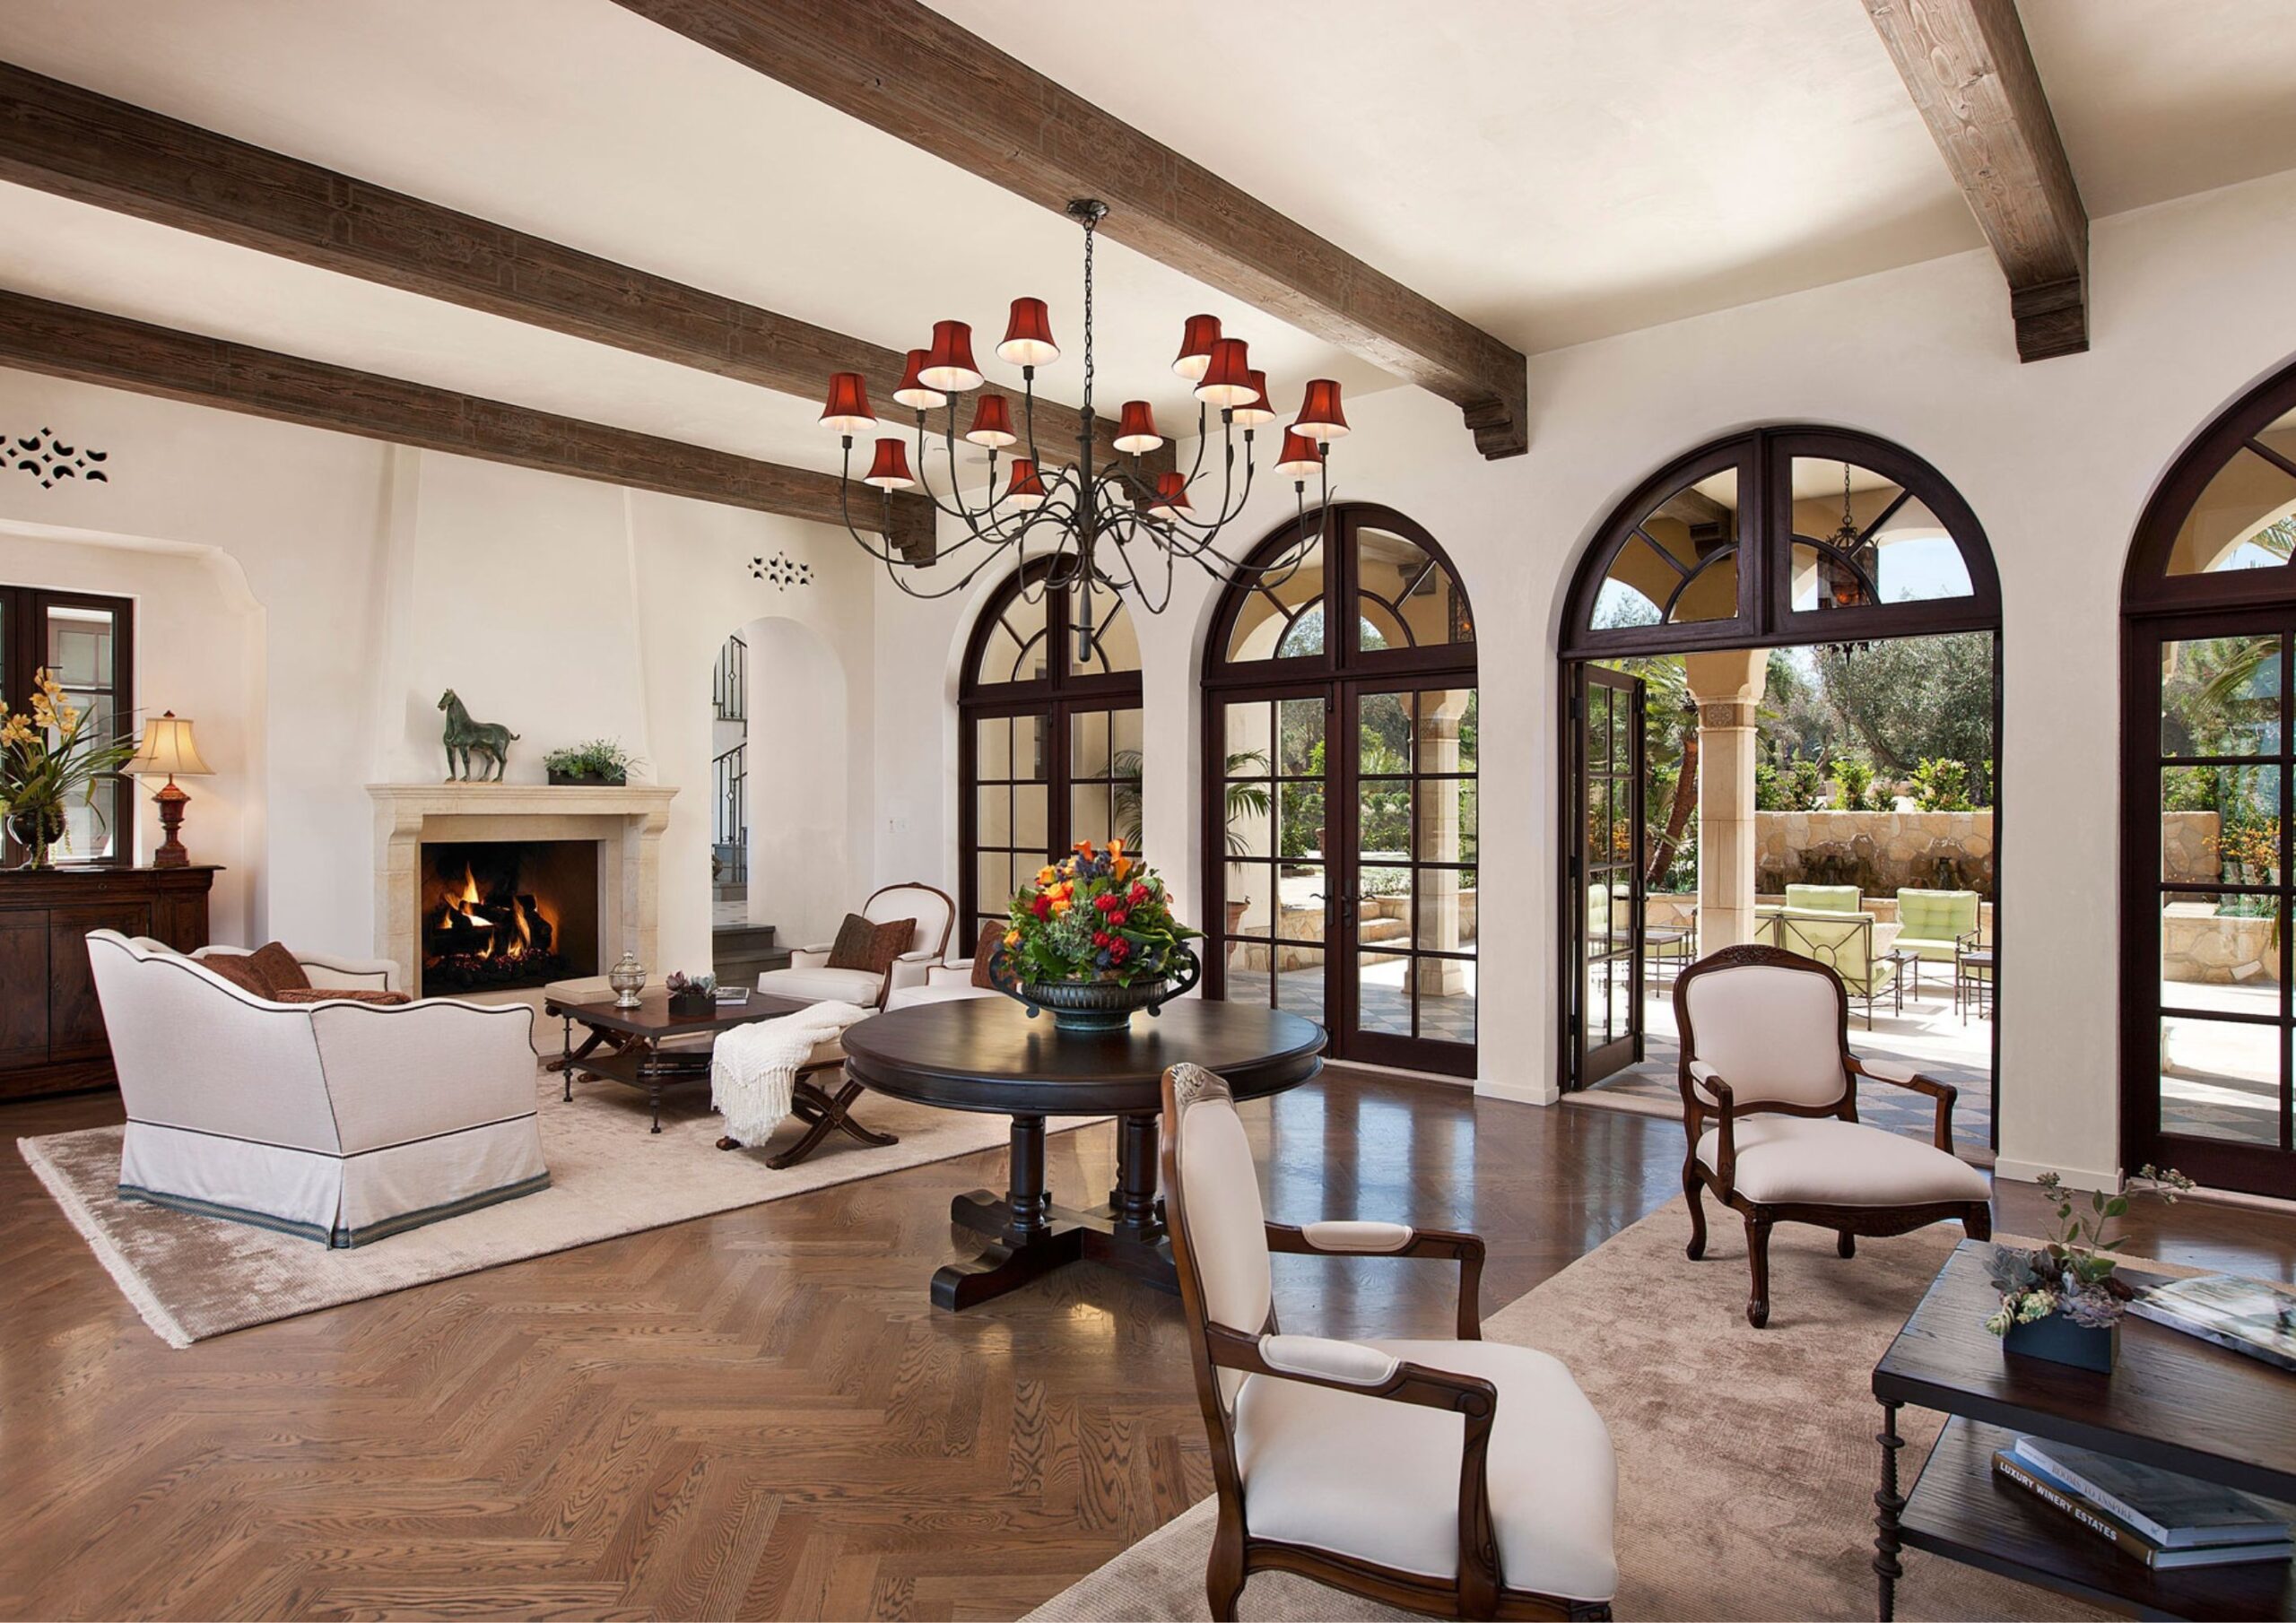 Spanish Revival Style: The Comeback of Its Enduring Appeal.